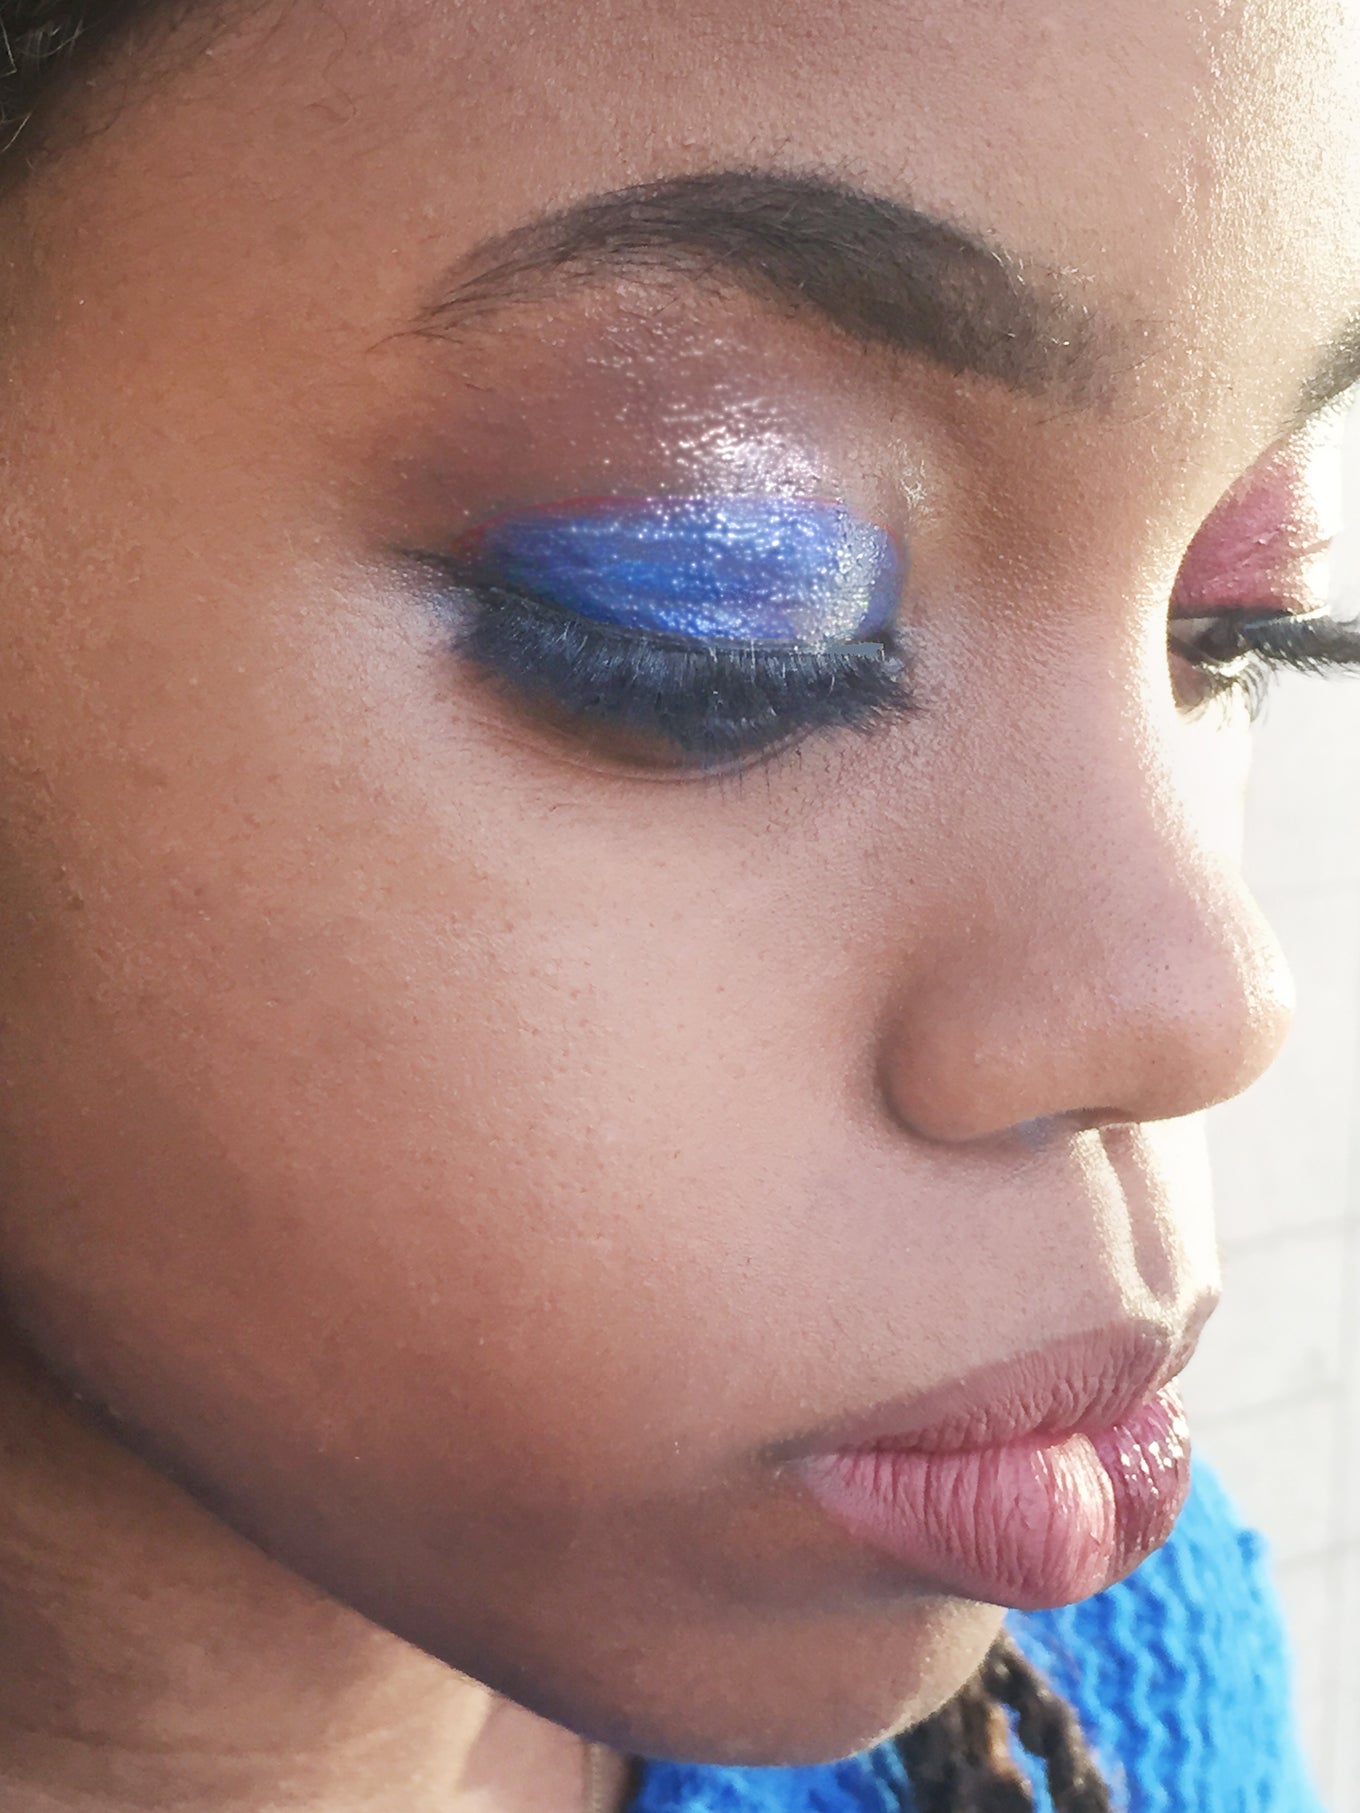 We Tried It: 3 Gorgeous Looks From Pat McGrath's Phantom 002 Collection